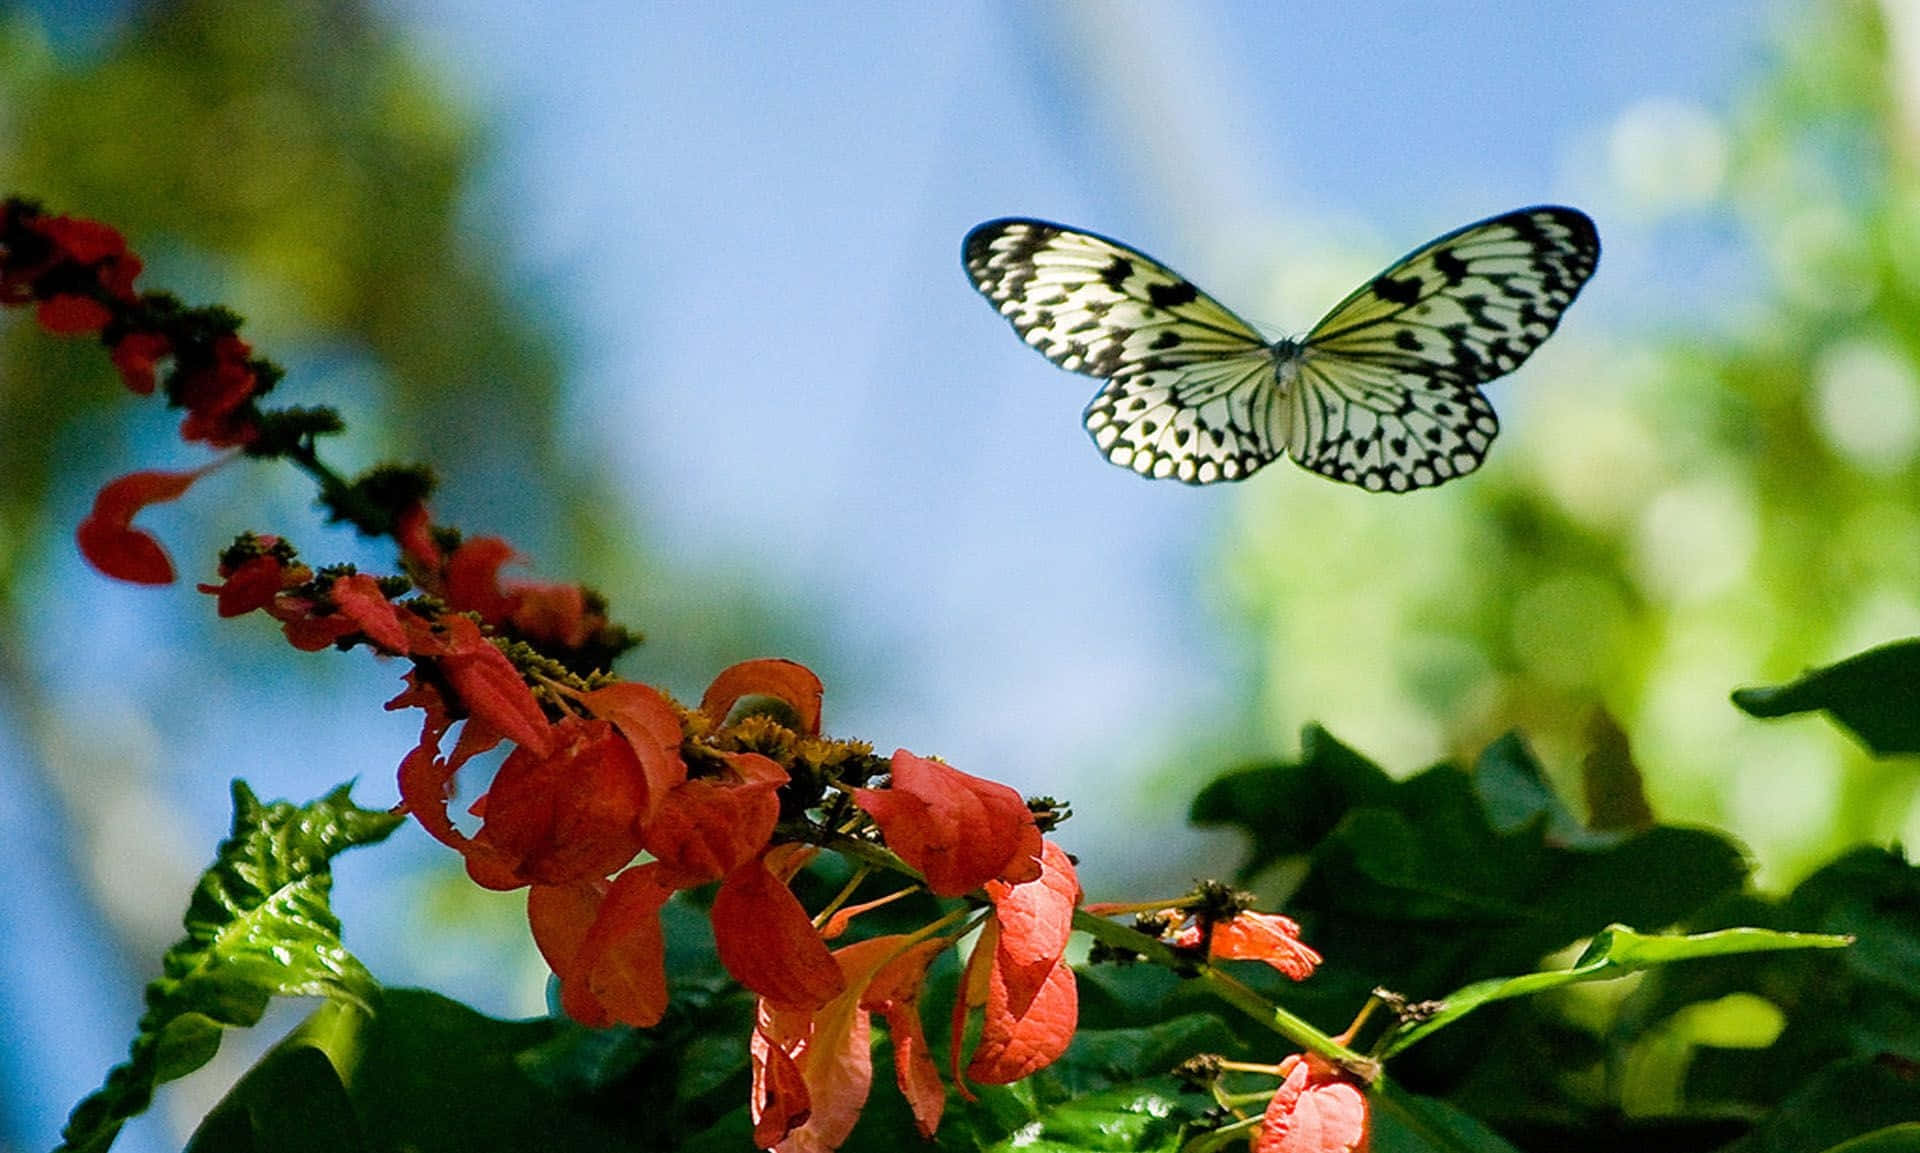 White butterfly - a symbol of life and beauty Wallpaper